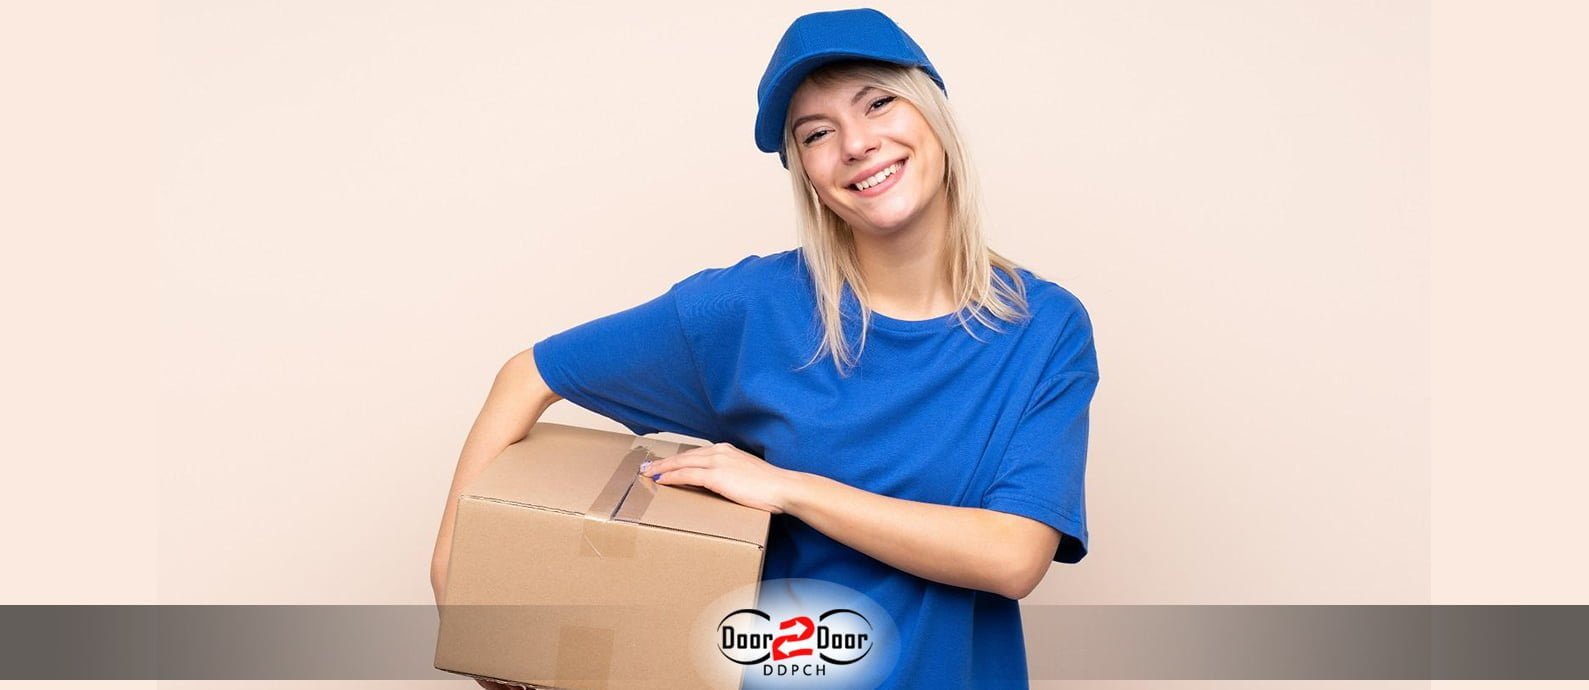 Express Courier Shipping Companies in China | The Top List